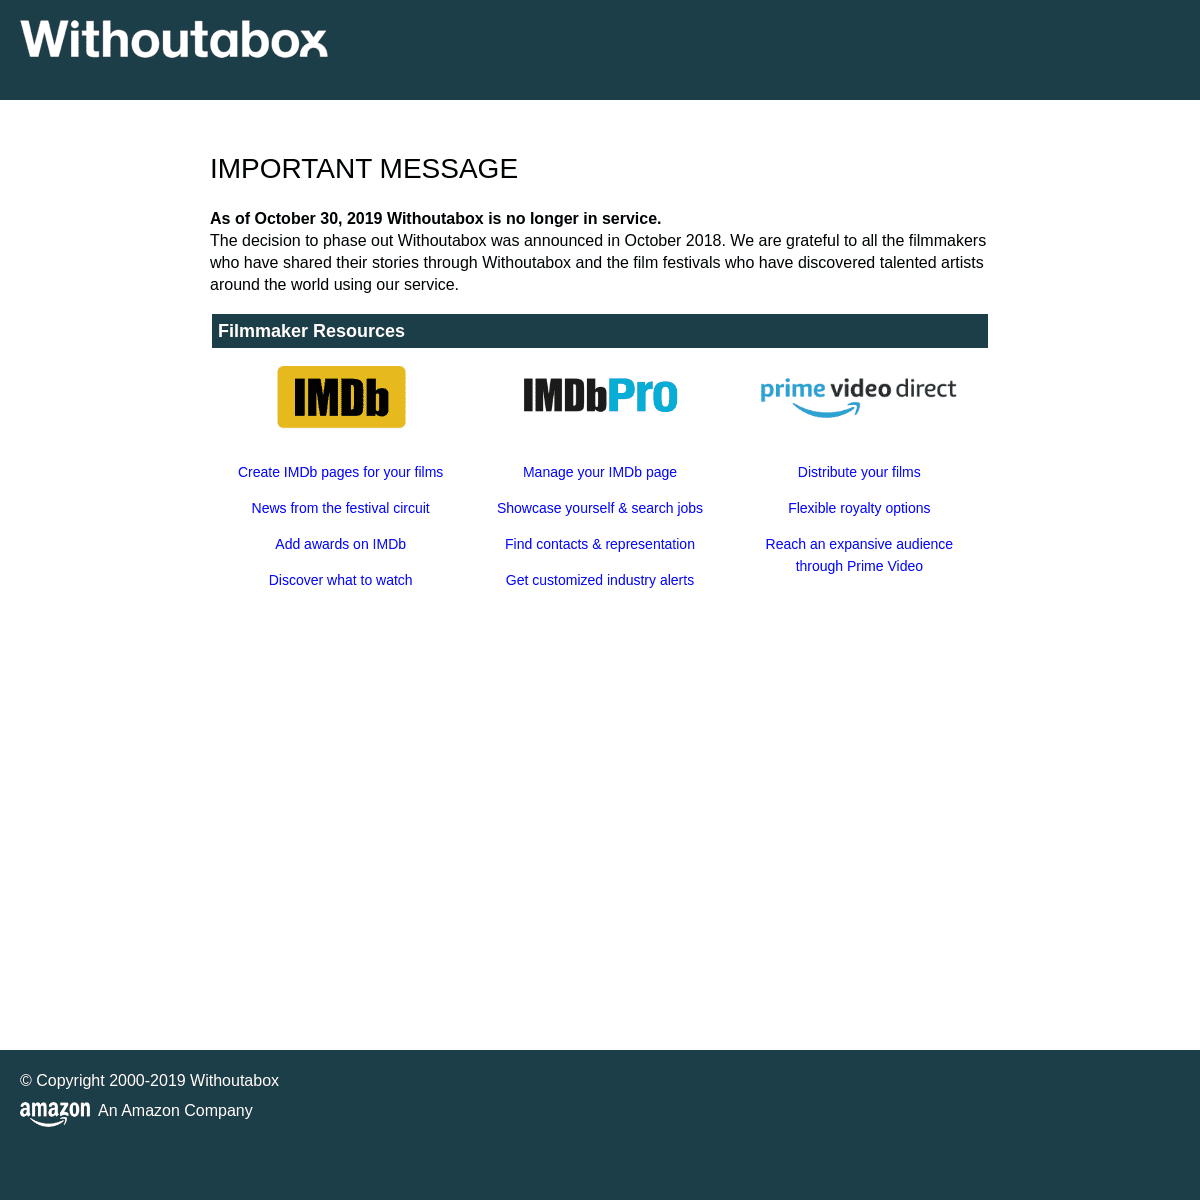 A complete backup of https://withoutabox.com